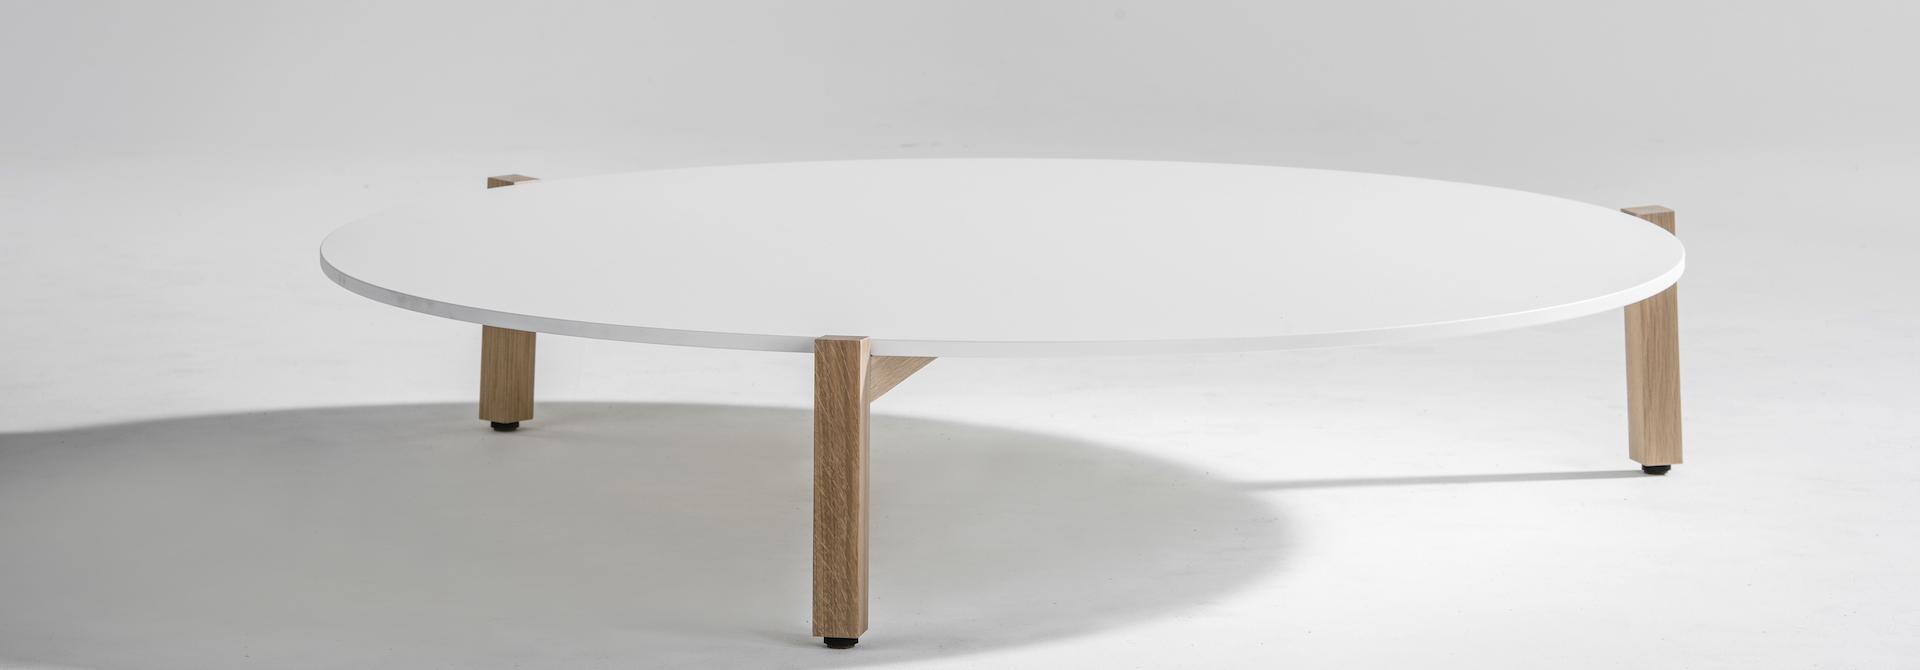 Living Room Table white with wood table-leg